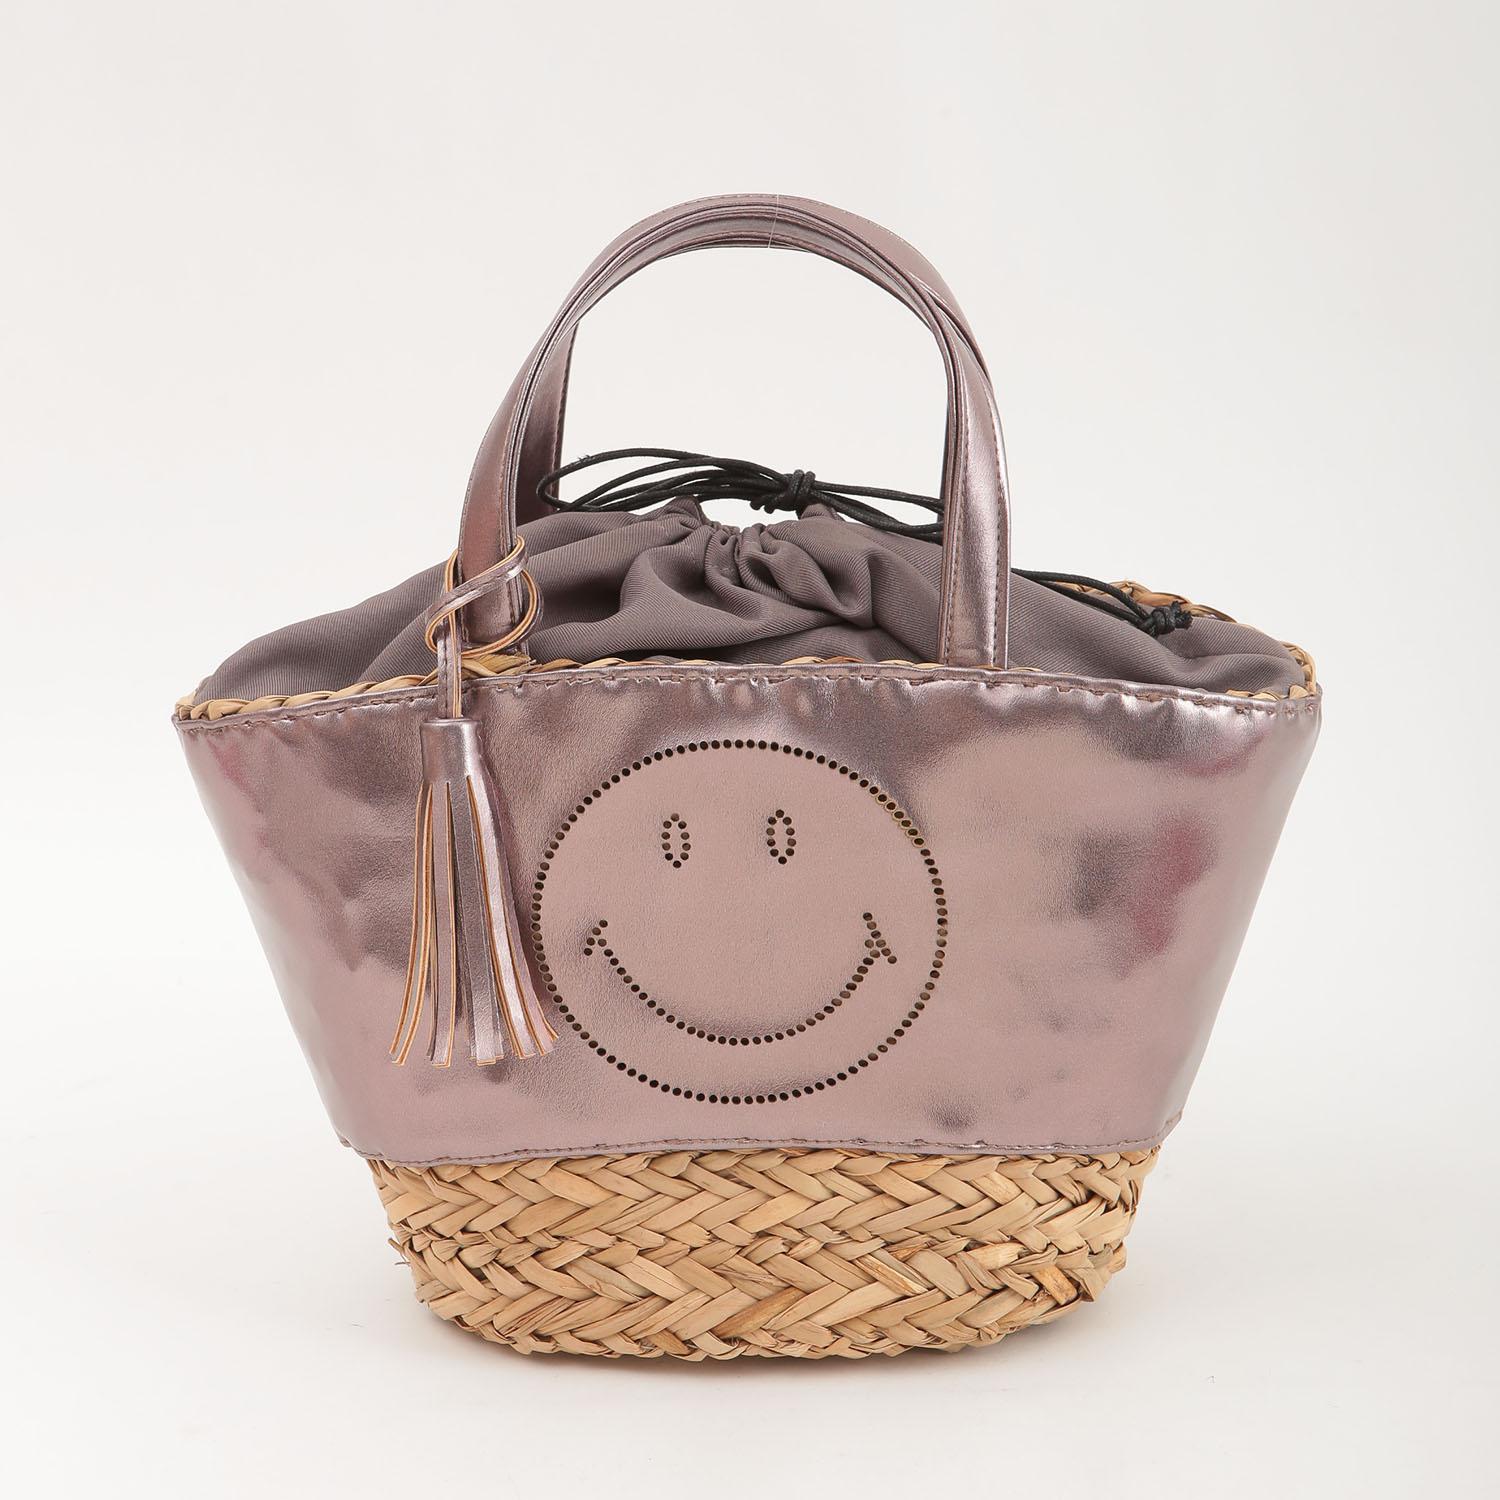 SALE【COOCO】SMILEY/フェイクレザーかごトートバッグ